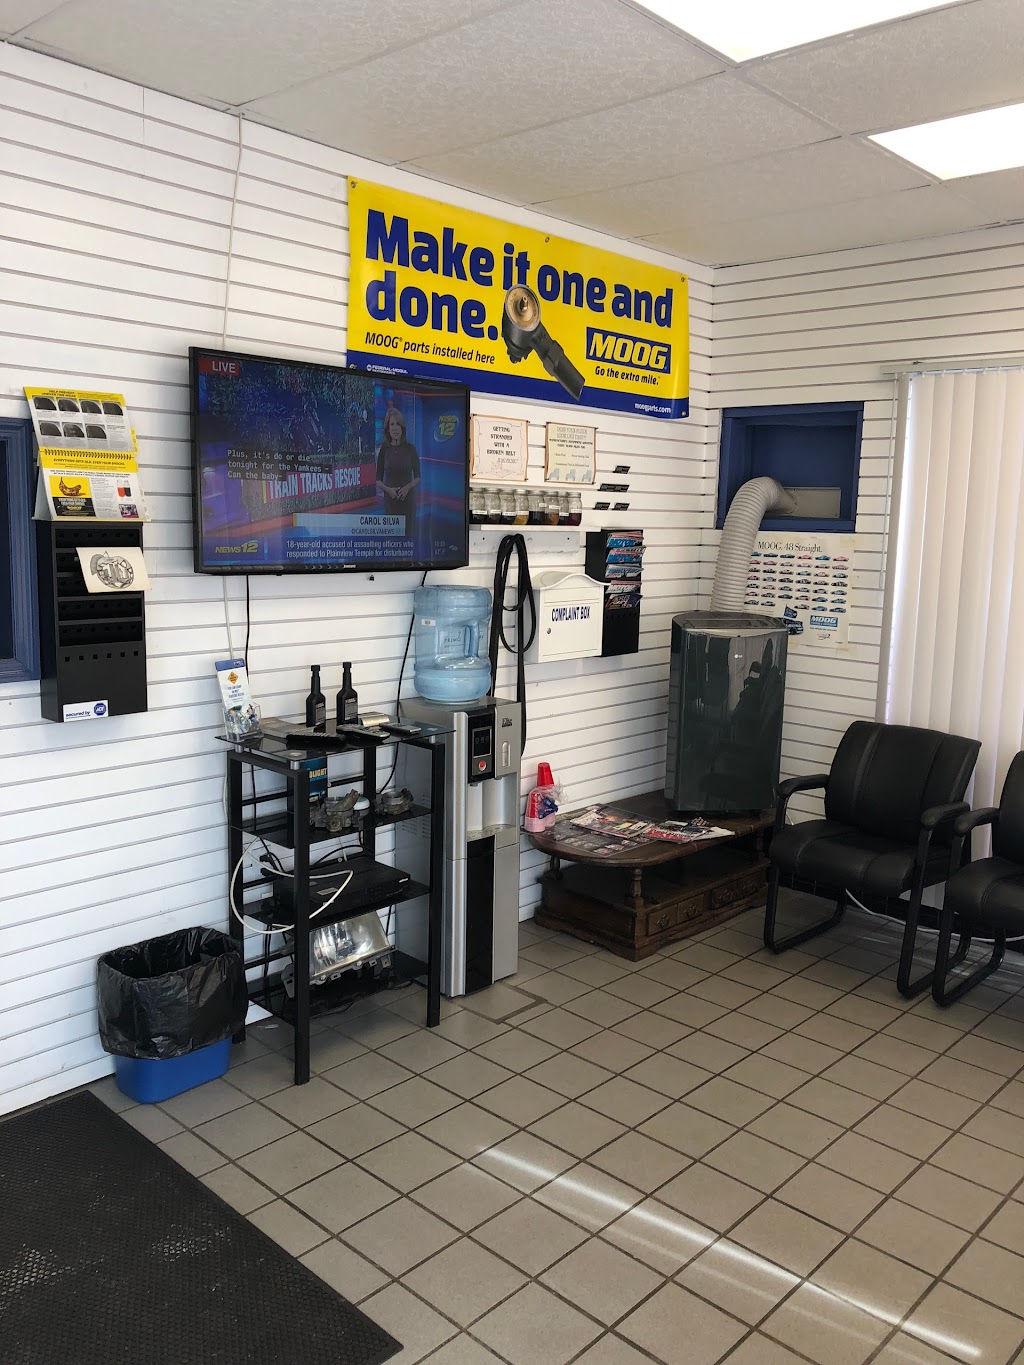 Best Price Auto Repair Patchogue | 451 W Main St, Patchogue, NY 11772 | Phone: (631) 307-9192